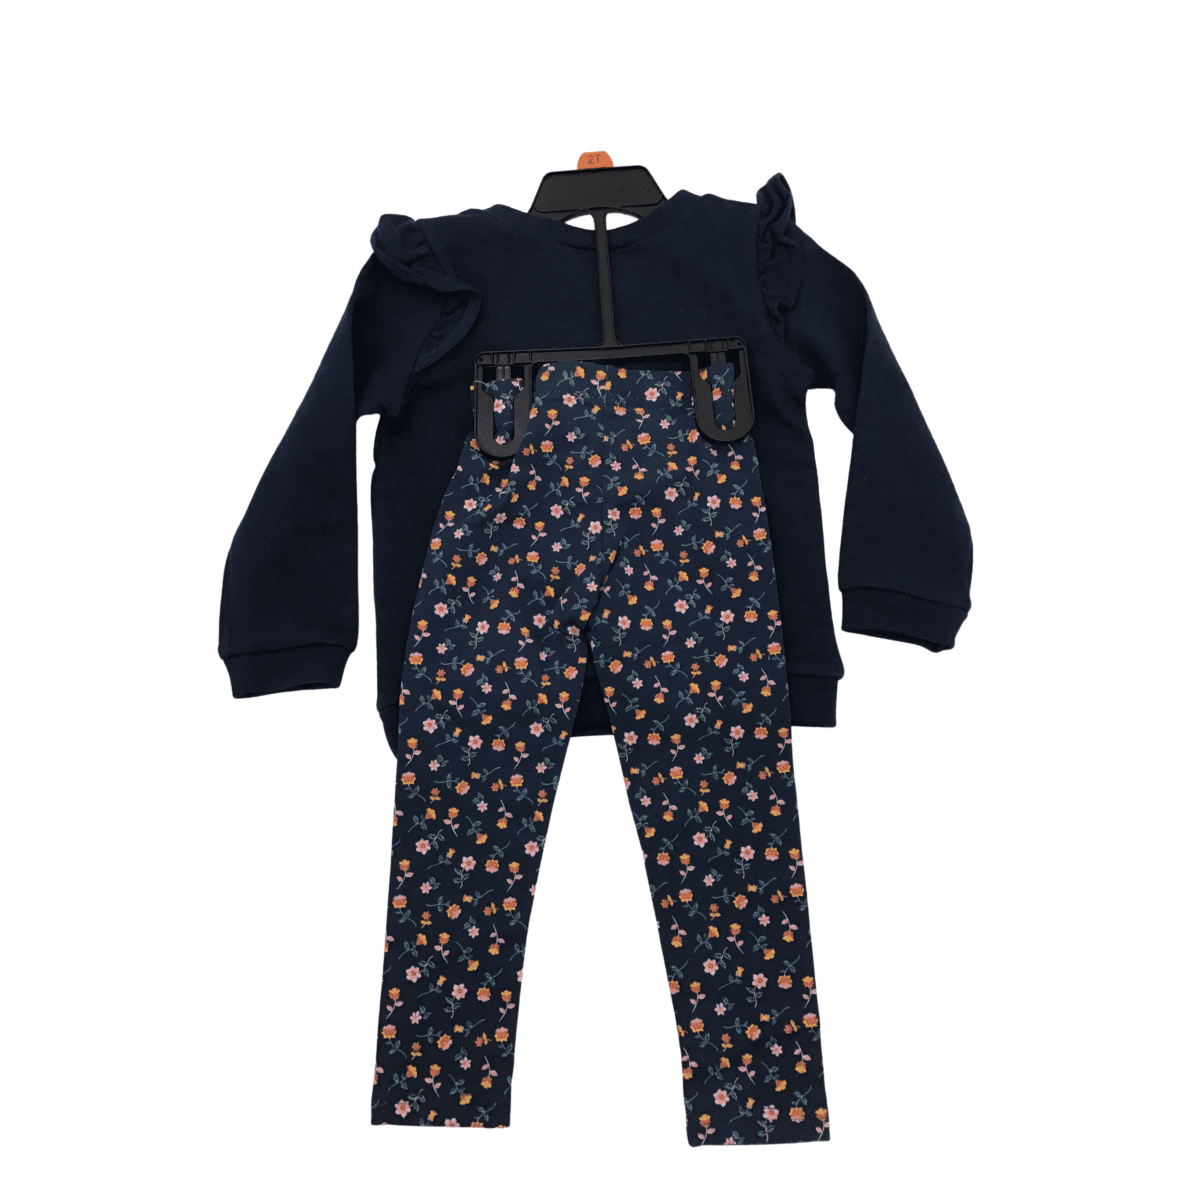 Carters 2 Piece Top and Legging set size 2T_01